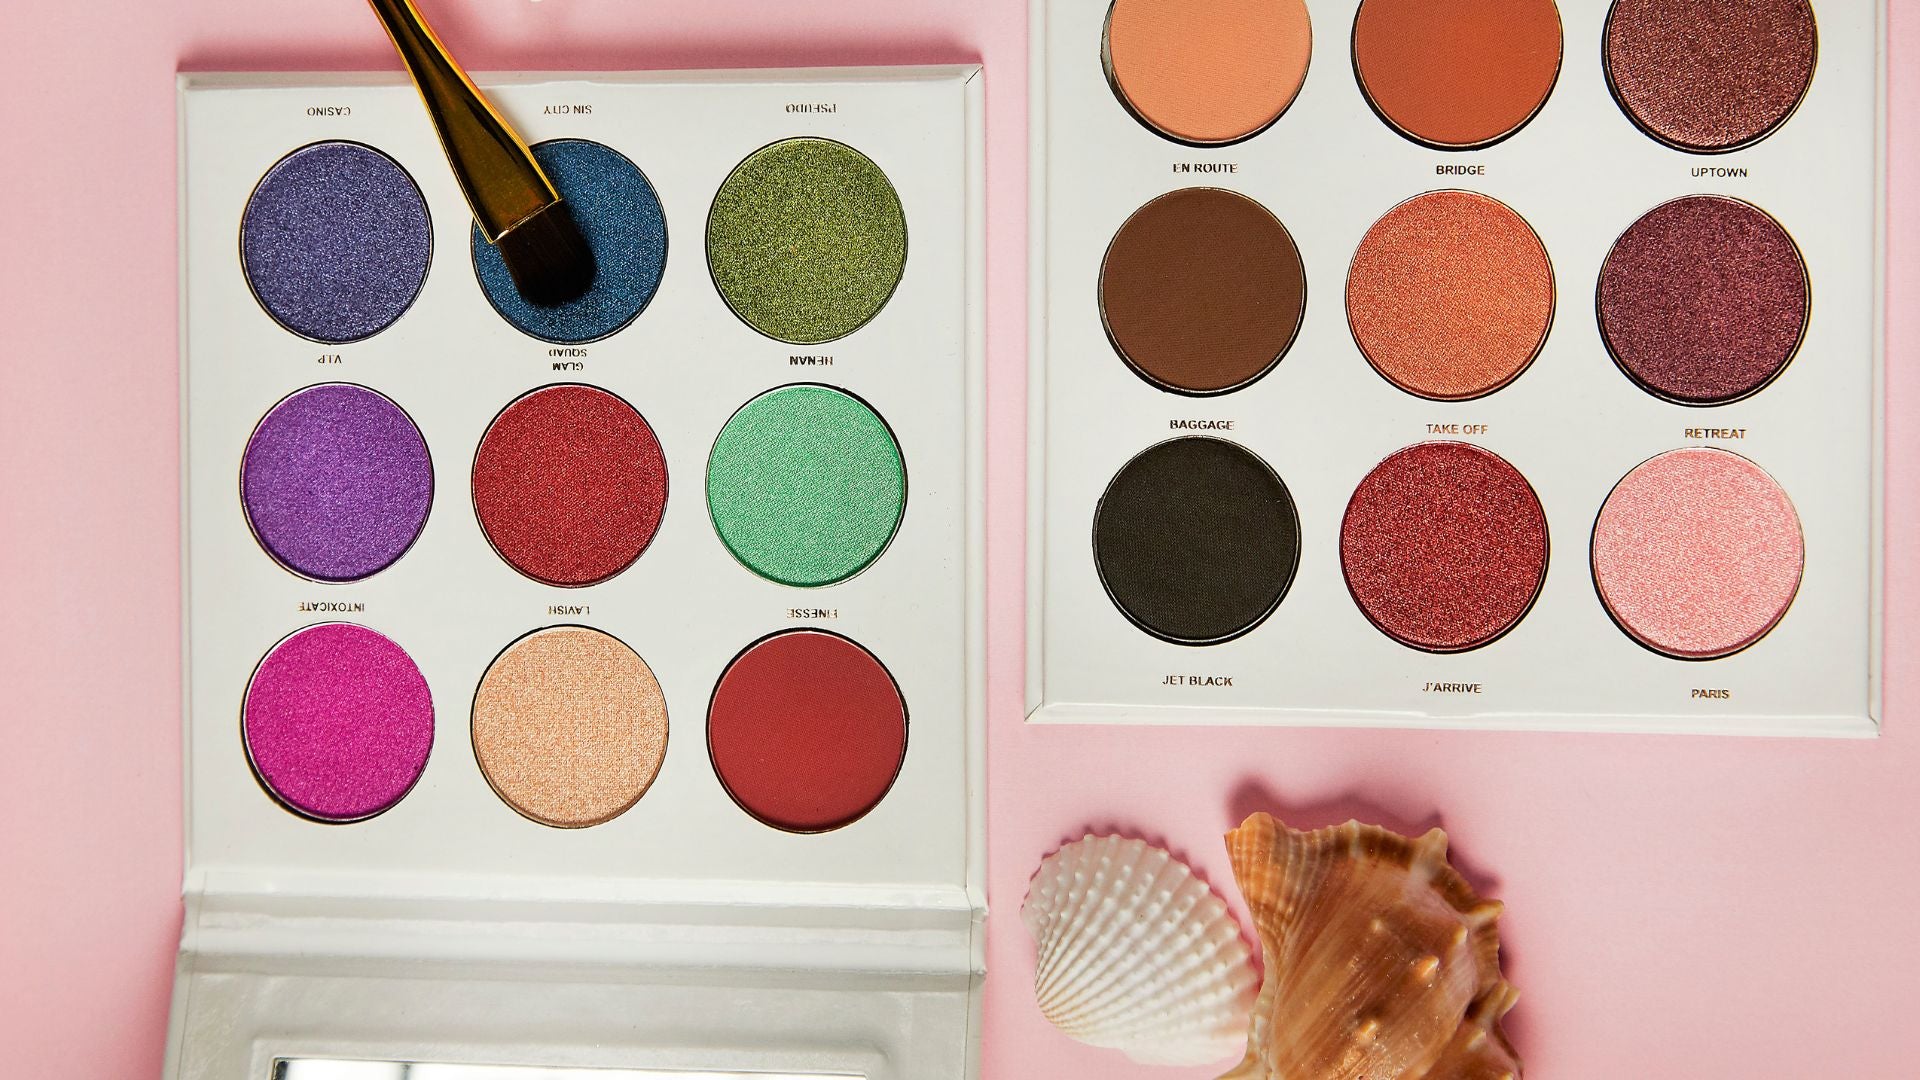 6 Tips To Get The Best Pigment Out Of Your Eyeshadow